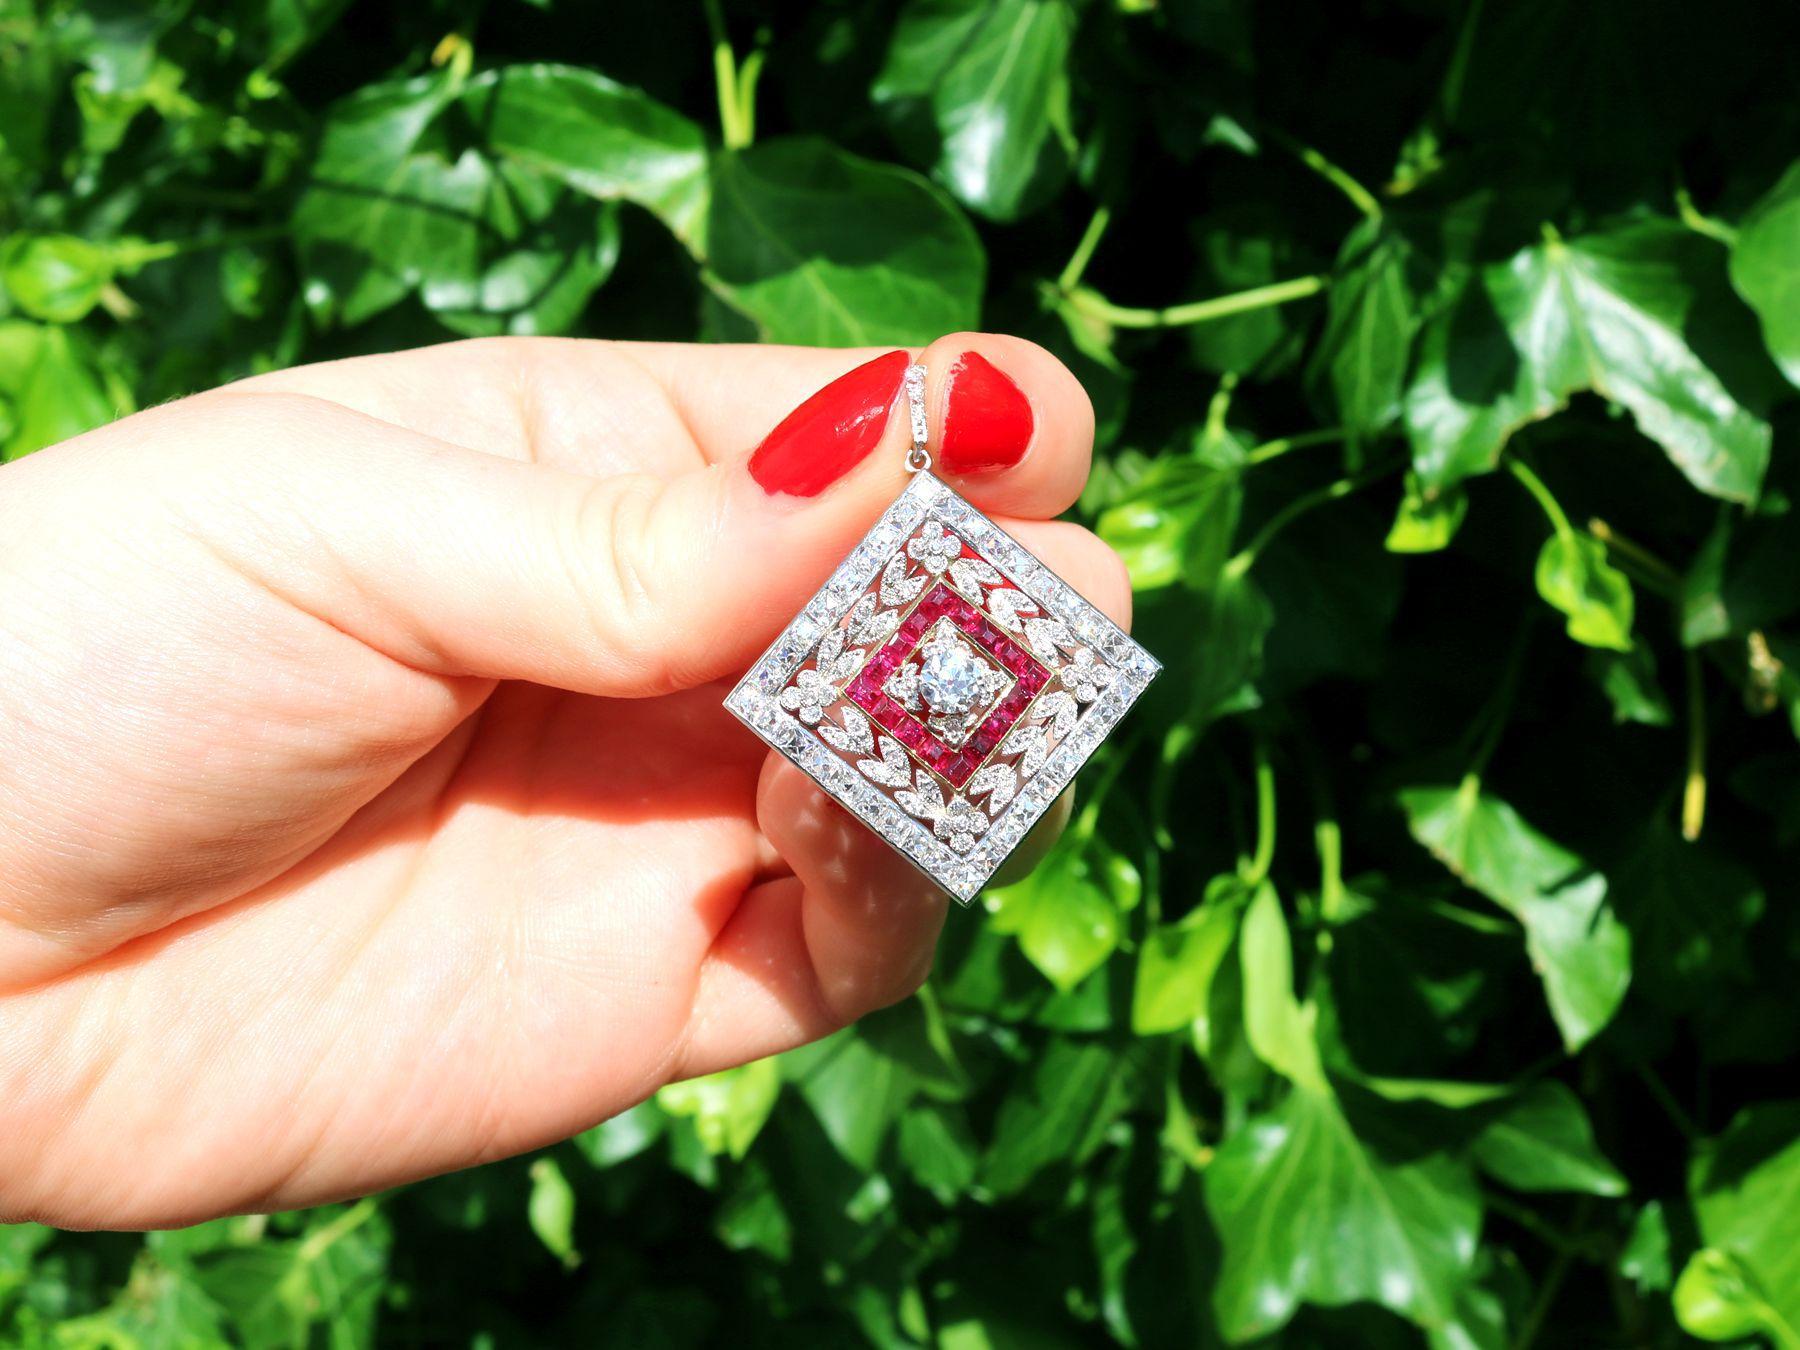 A magnificent and exceptional antique 3.48 carat diamond and 0.53 carat ruby, platinum and 18 karat yellow gold pendant / brooch; part of our diverse antique jewelry collections.

This magnificent, fine and impressive ruby and diamond pendant/brooch